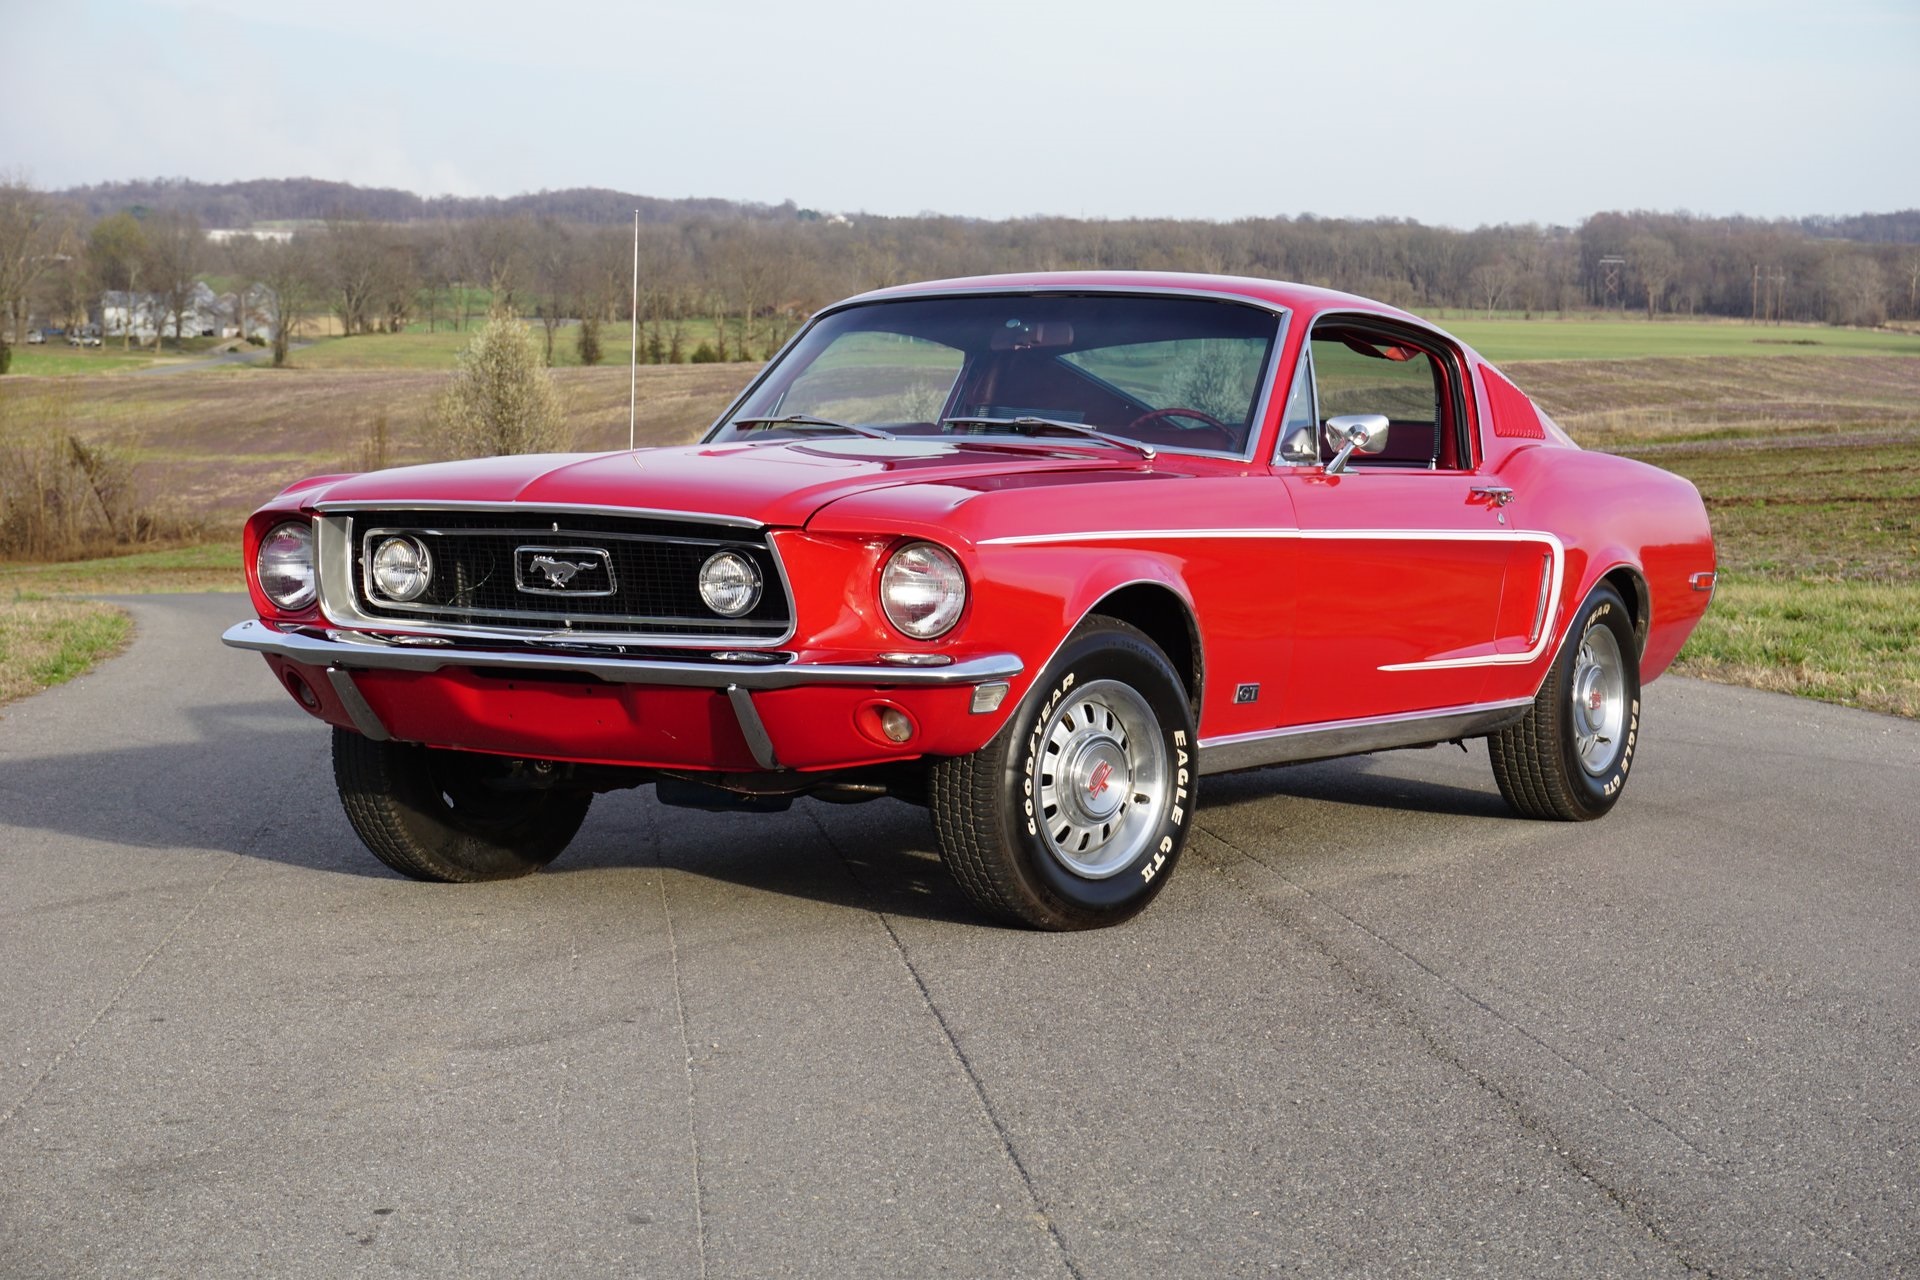 Mustang Of The Day: 1968 Ford Mustang Cardinal Edition